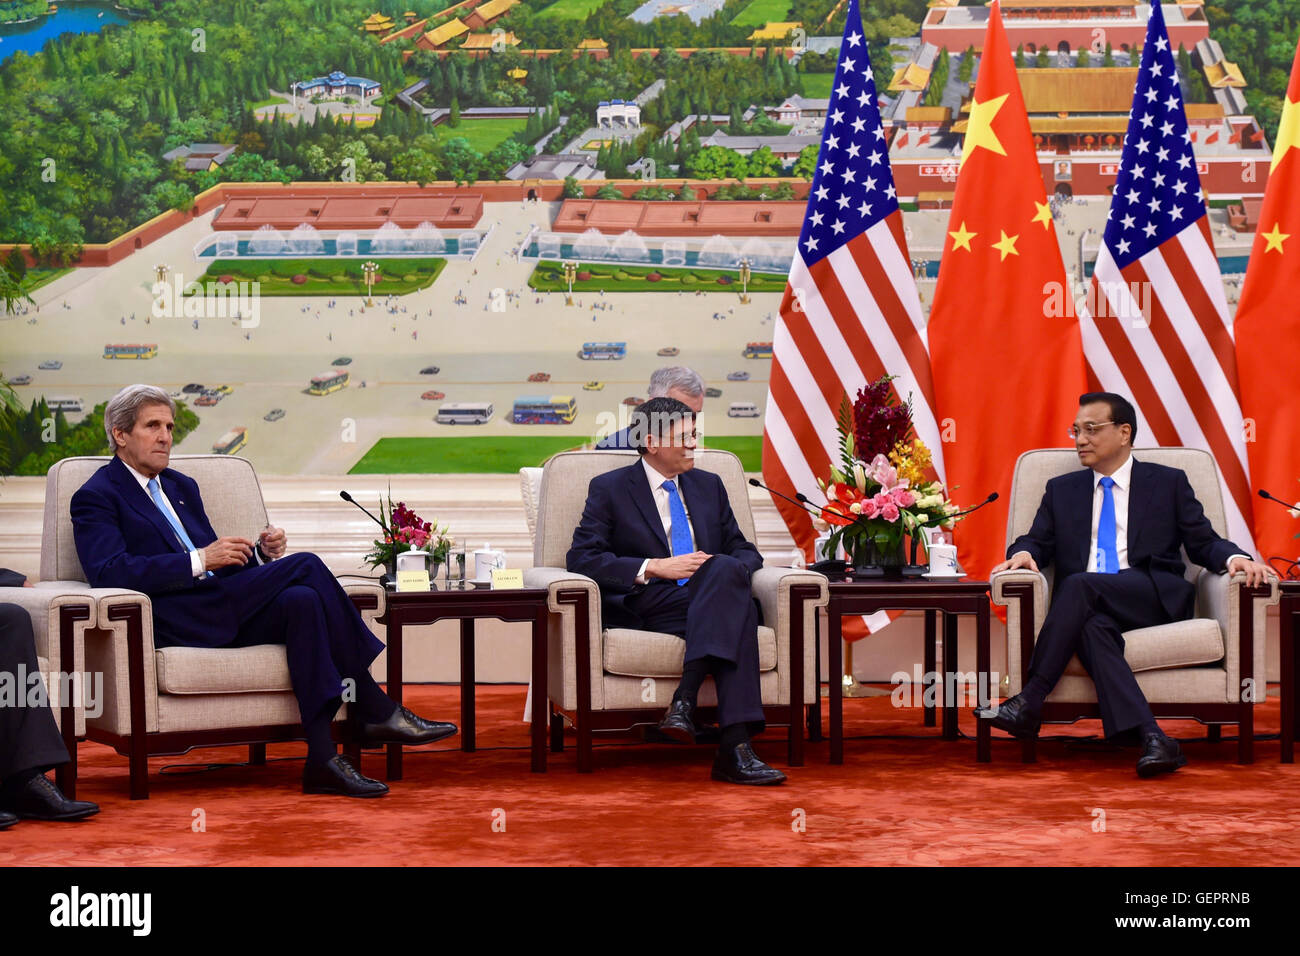 Secretaries Kerry and Lew Meet With Chinese Premier Li Amid the U.S.-China Strategic and Economic Dialogue in Beijing Stock Photo